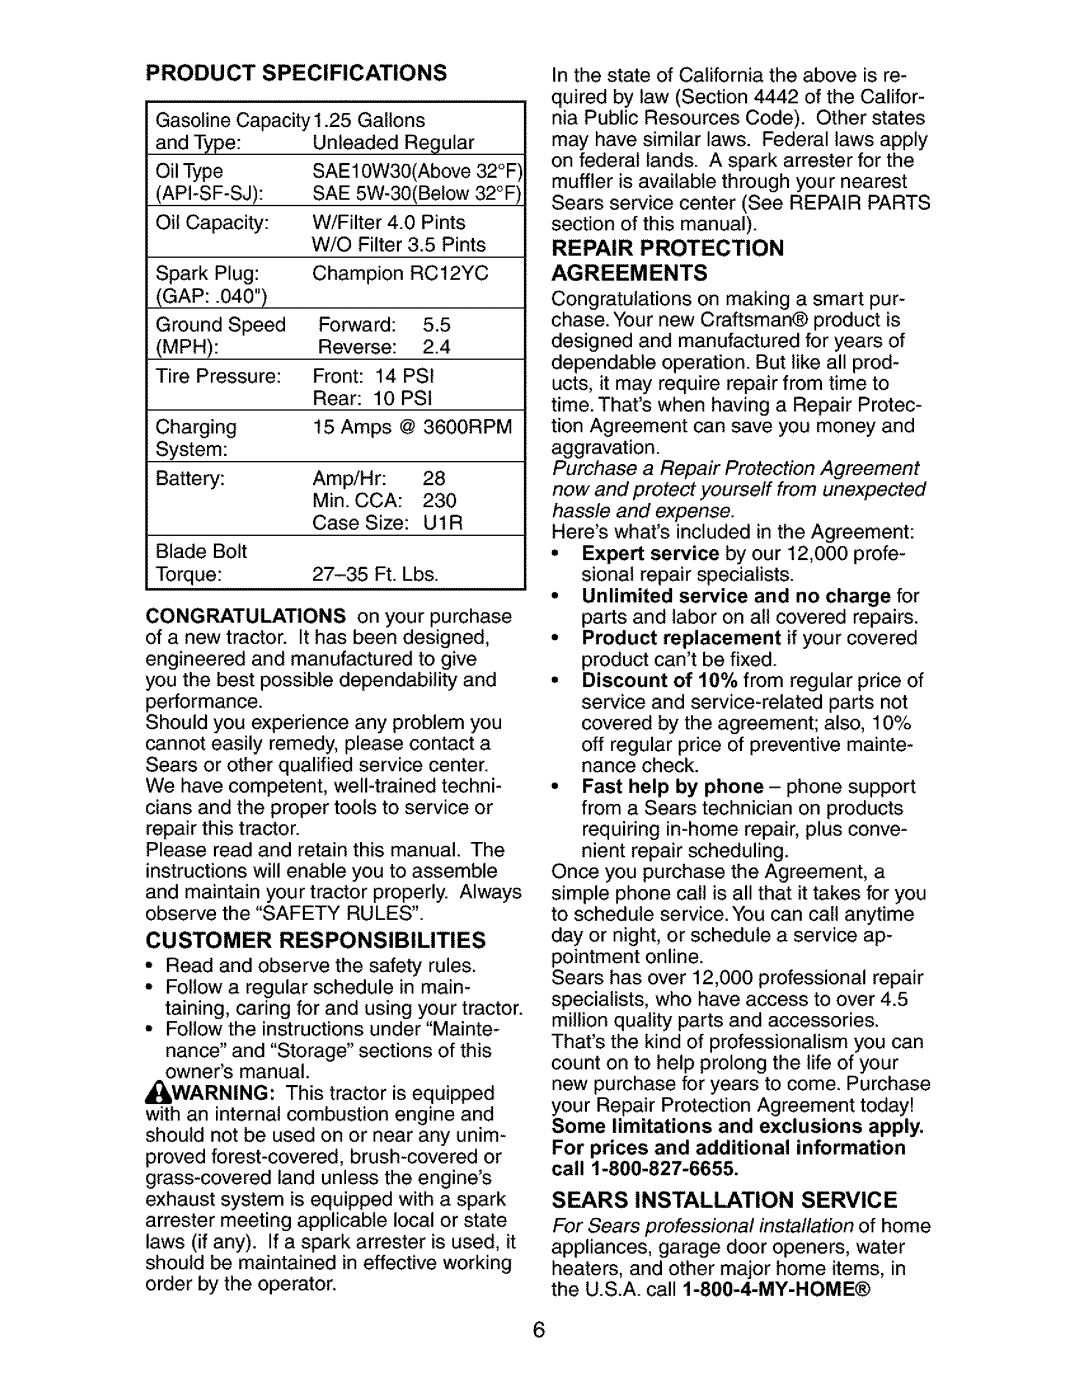 Craftsman 917.27316 owner manual Product Specifications, Customer Responsibilities, Sears Installation Service 